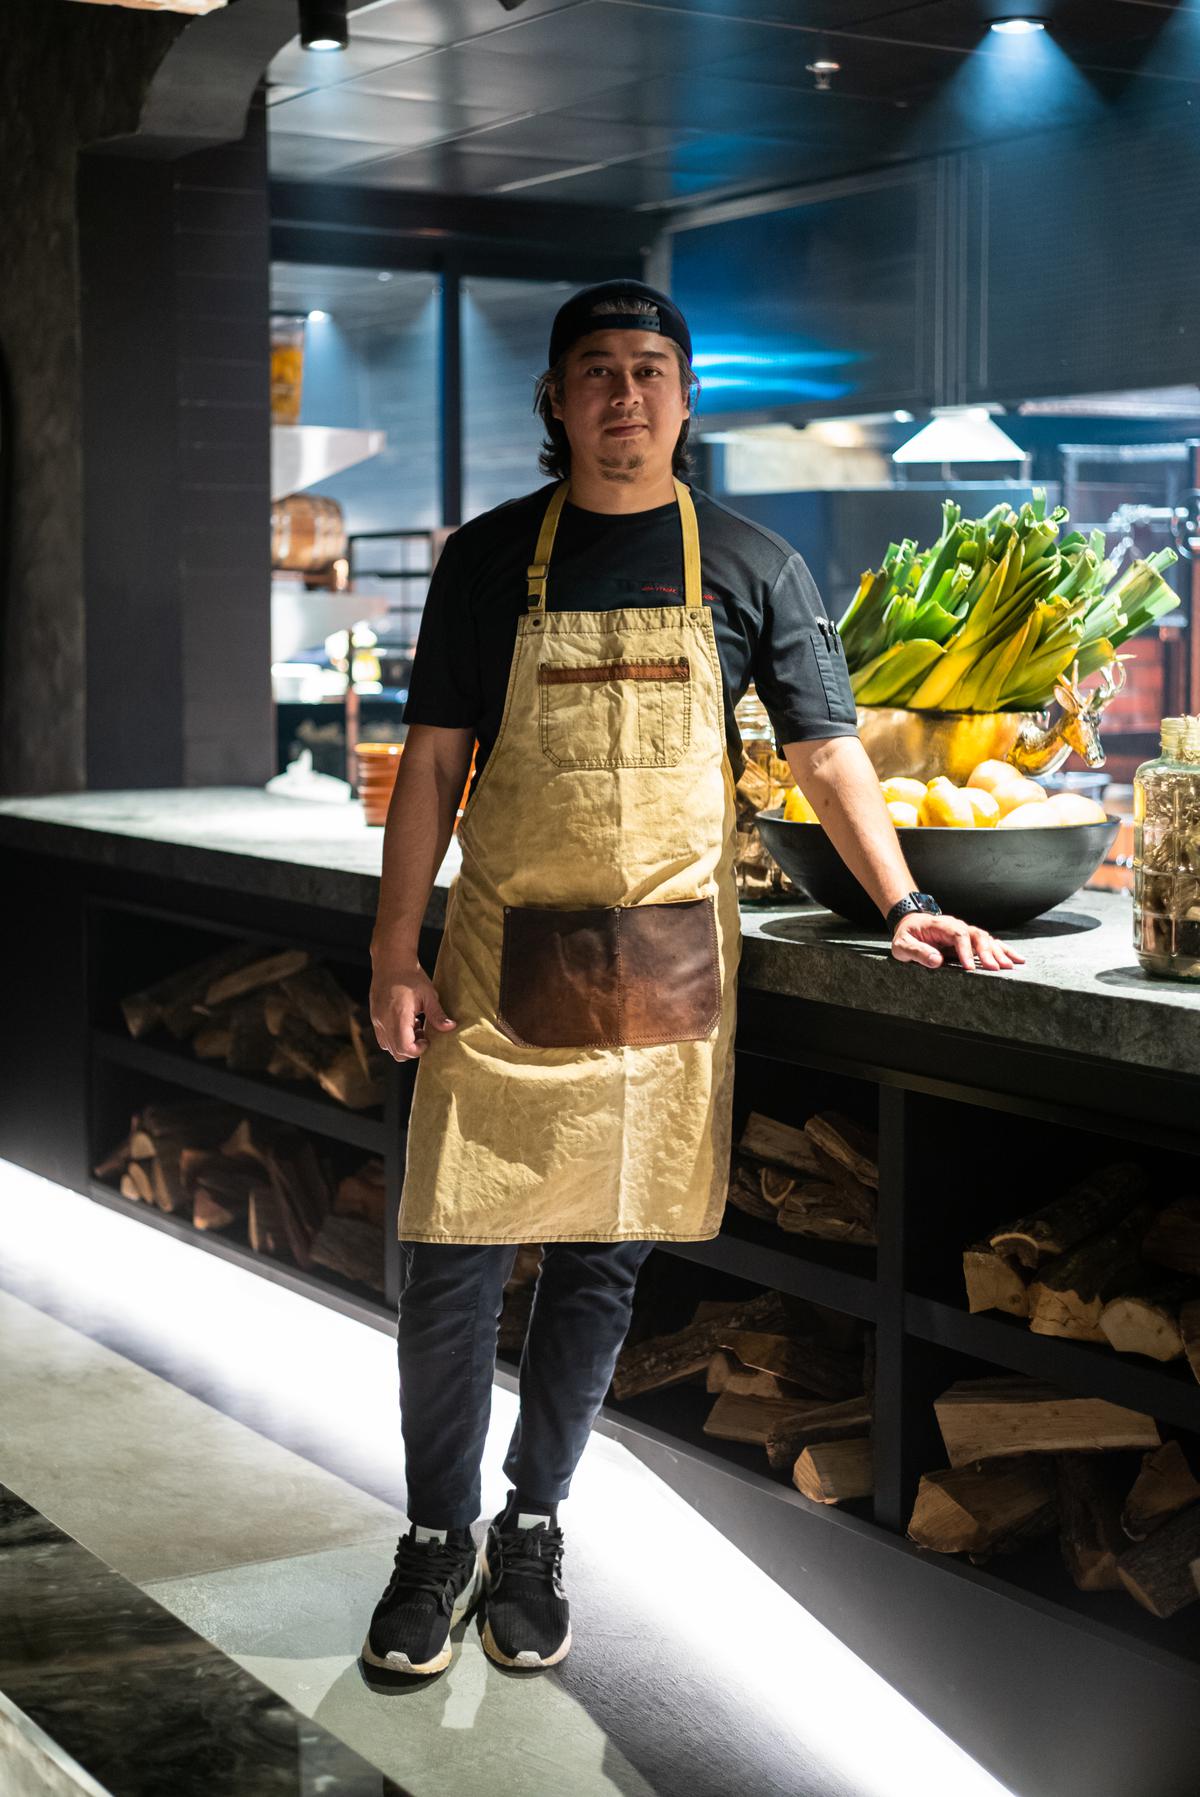 Akmal Anuar, Chef-Owner at 11 Woodfire